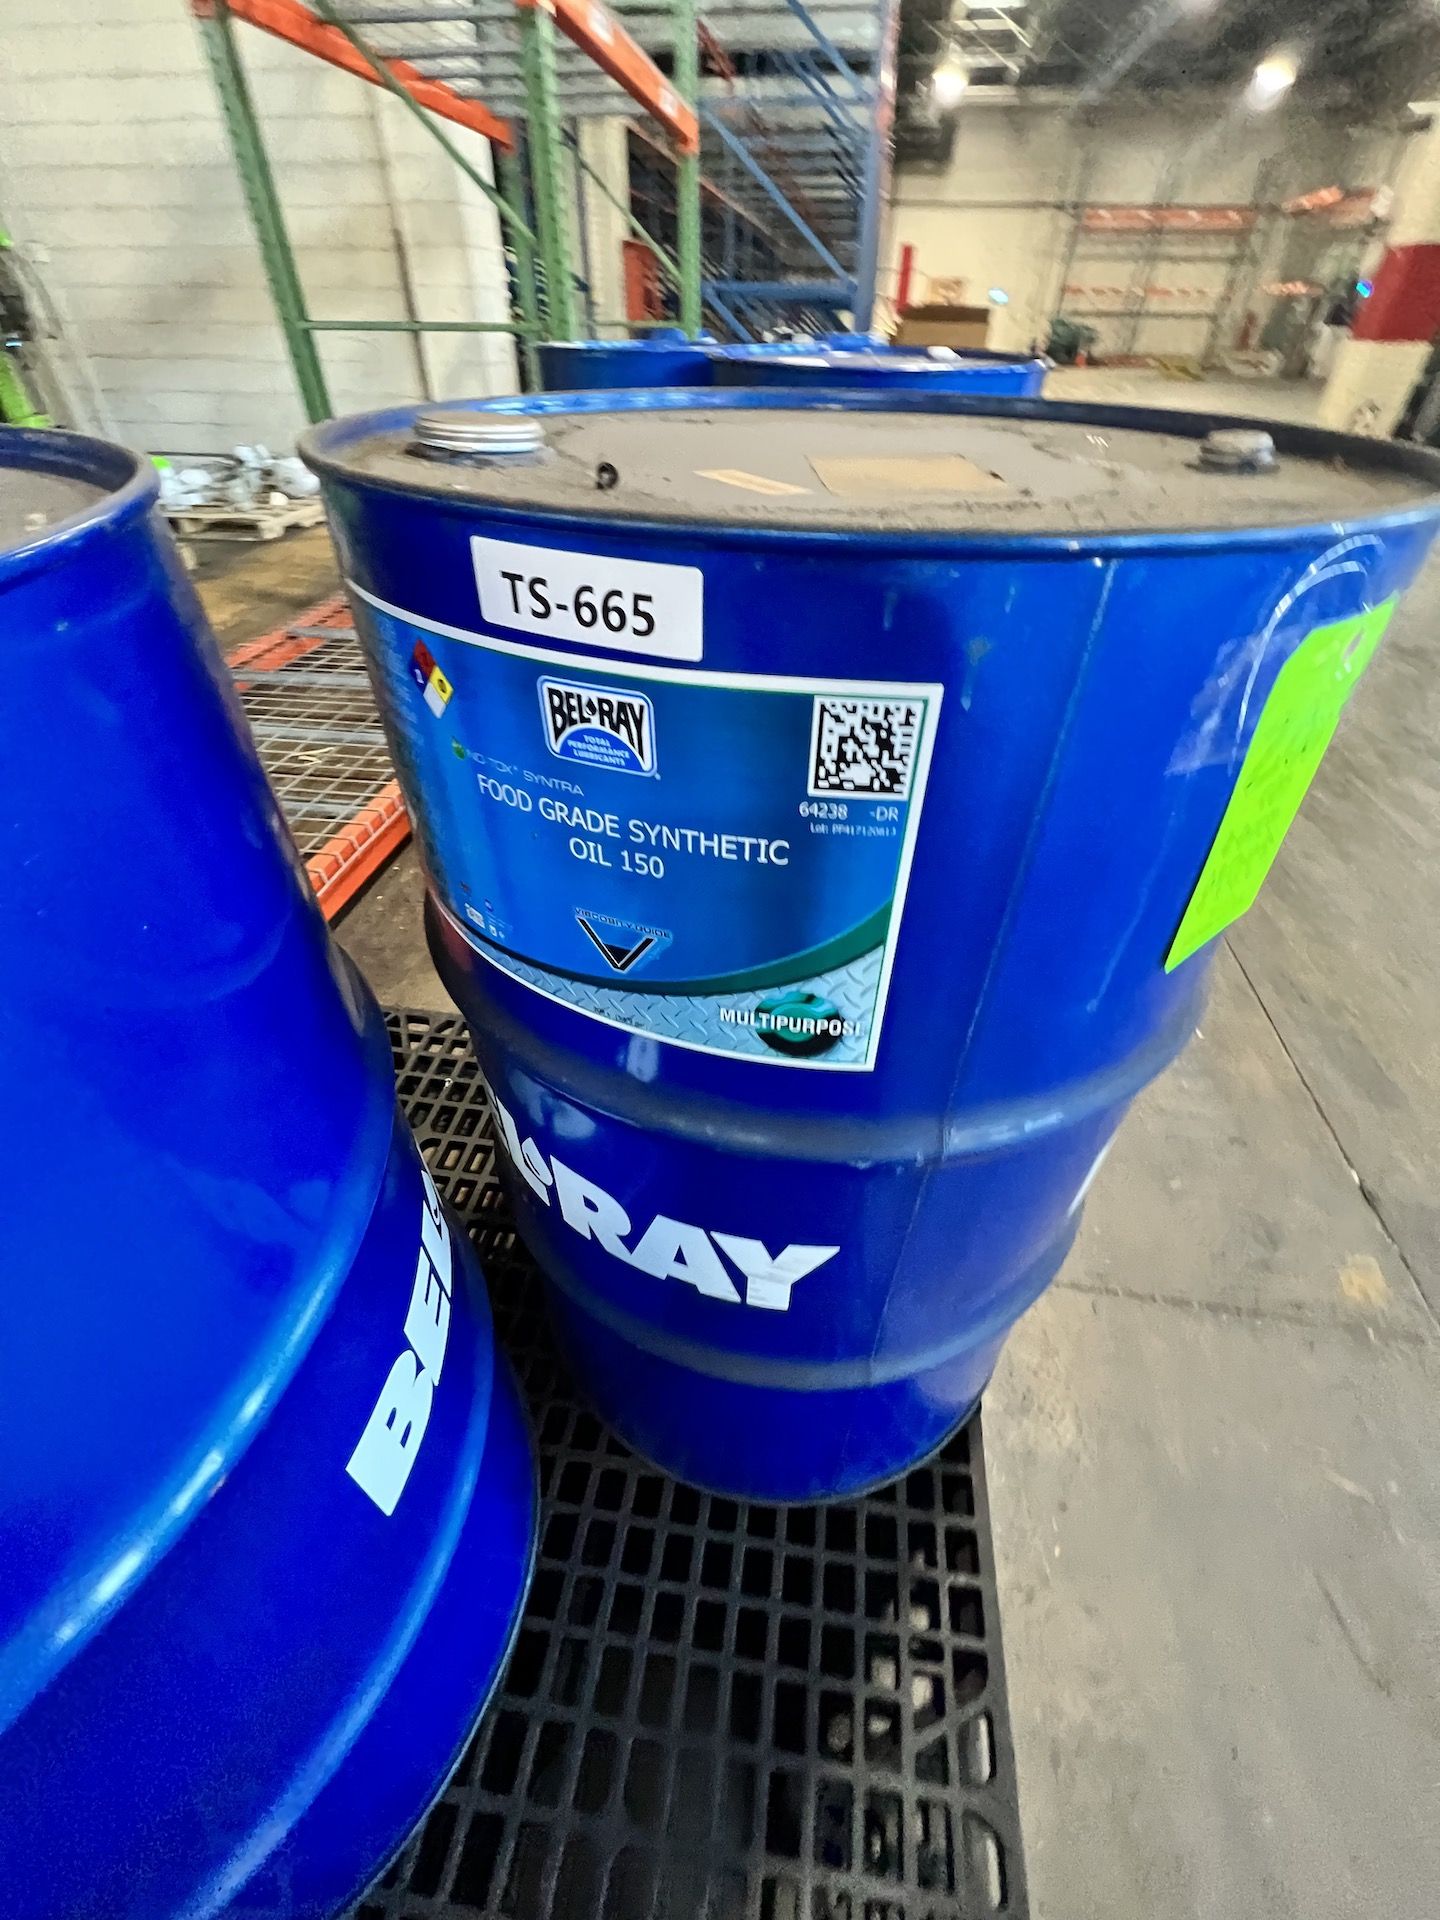 (6) BARRELS ON (2) PALLETS OF Belray No Tox Synthetic Food Grade Oil 150, Product Code # 64238-DR, - Image 7 of 8